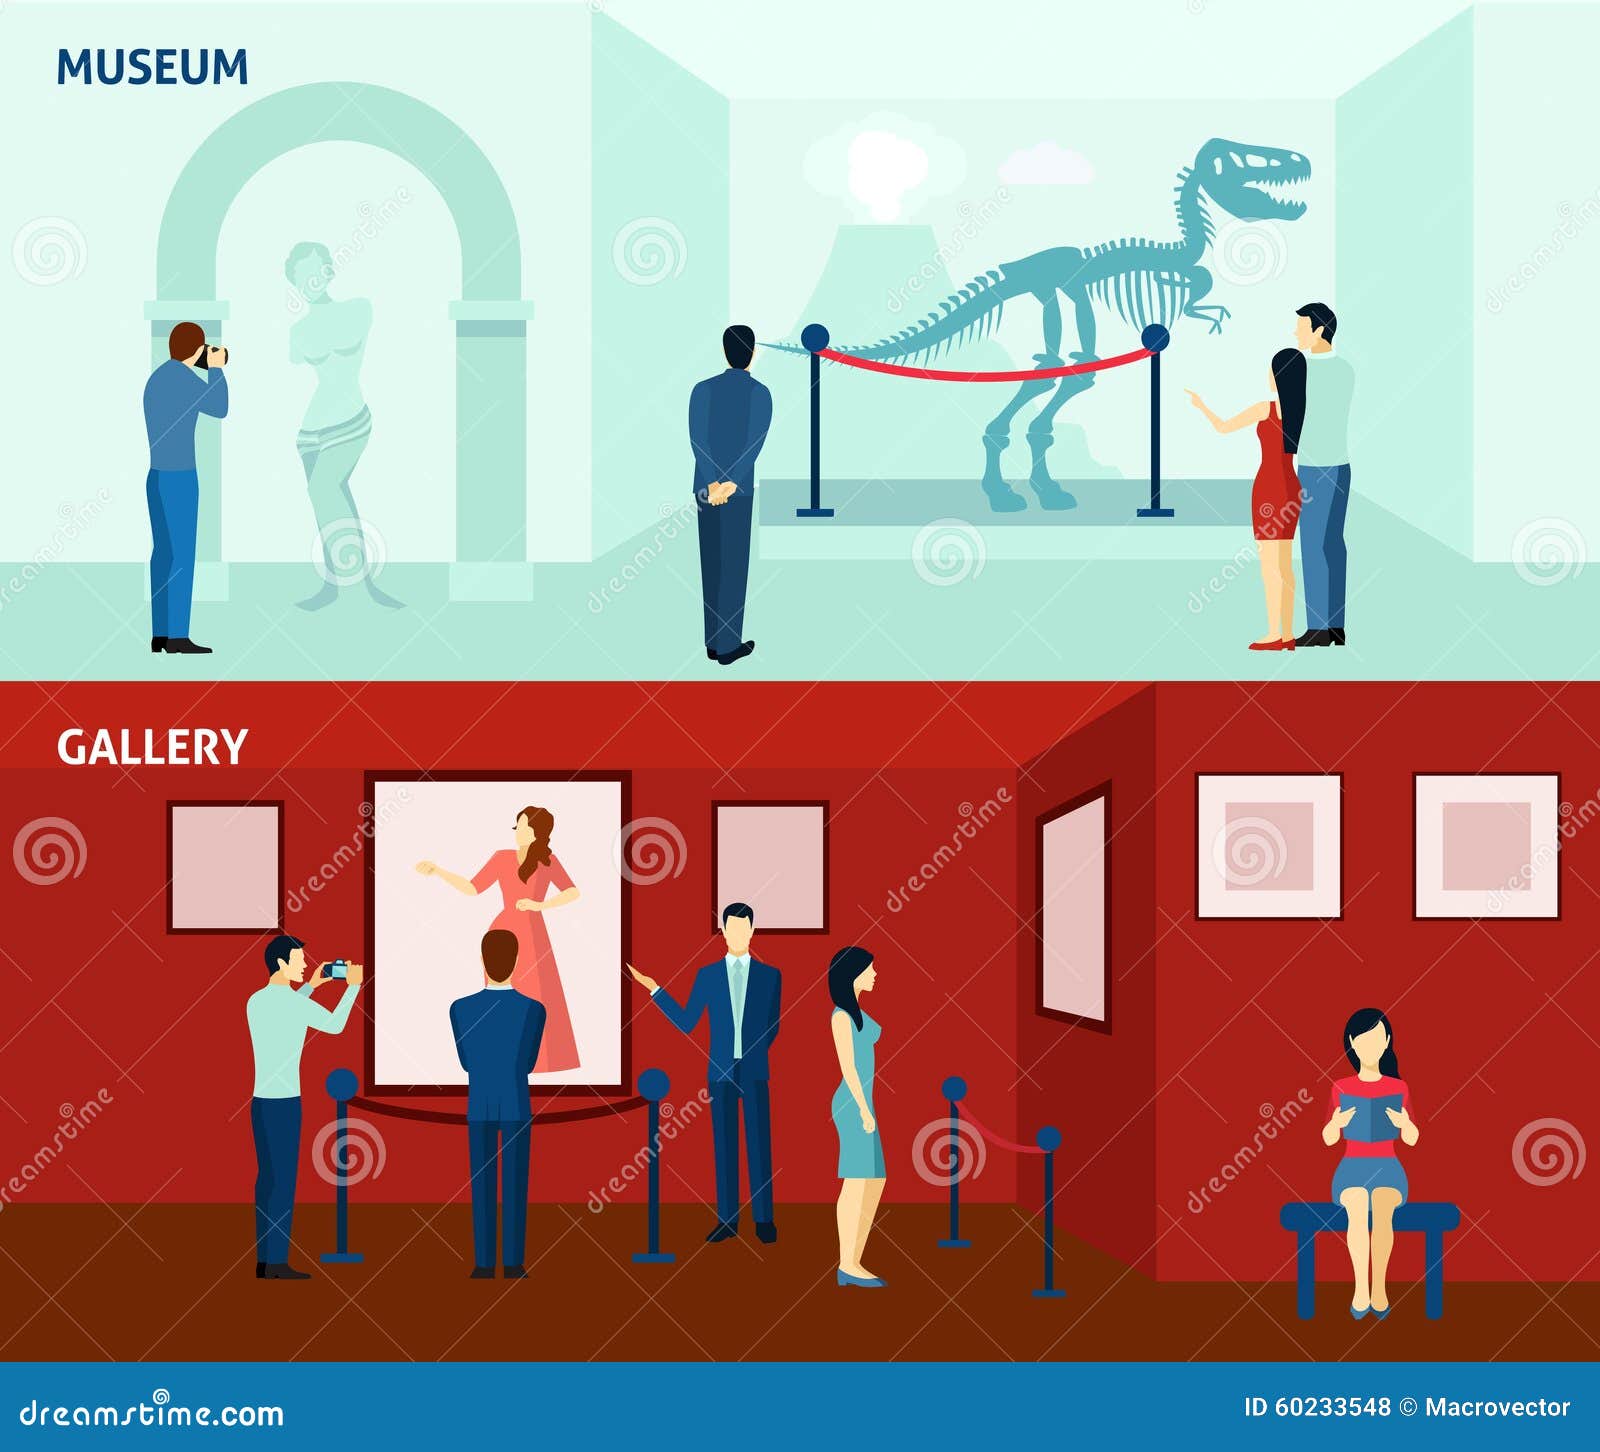 museum visitors 2 flat banners poster